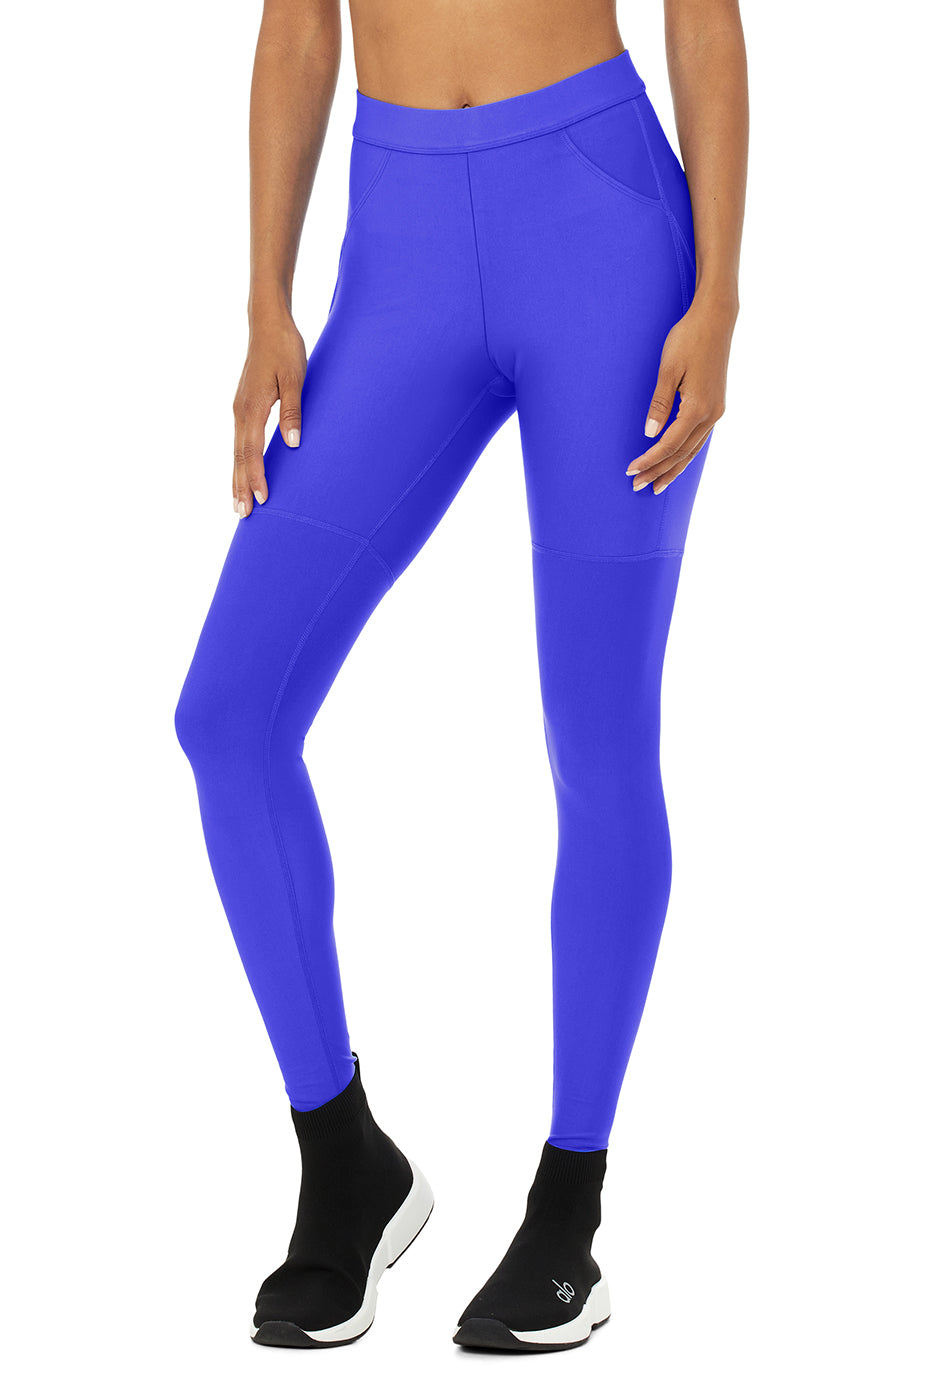 Back At It Again Solid Blue Leggings - Small